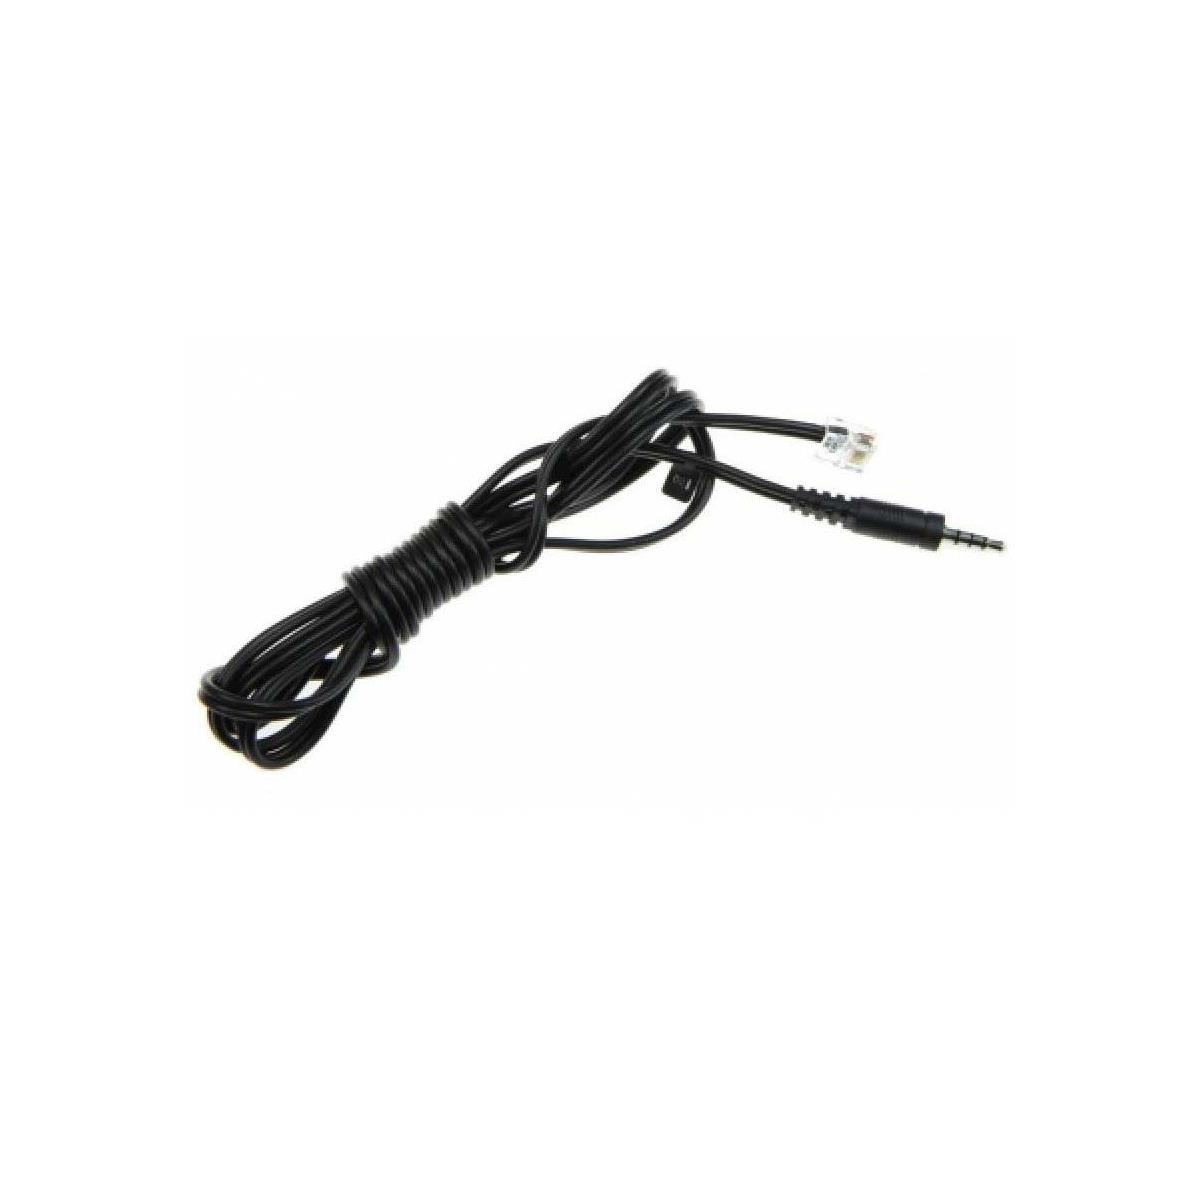 Image of Konftel GSM DECT 2.5mm Cable for 300 Series Conference Phones